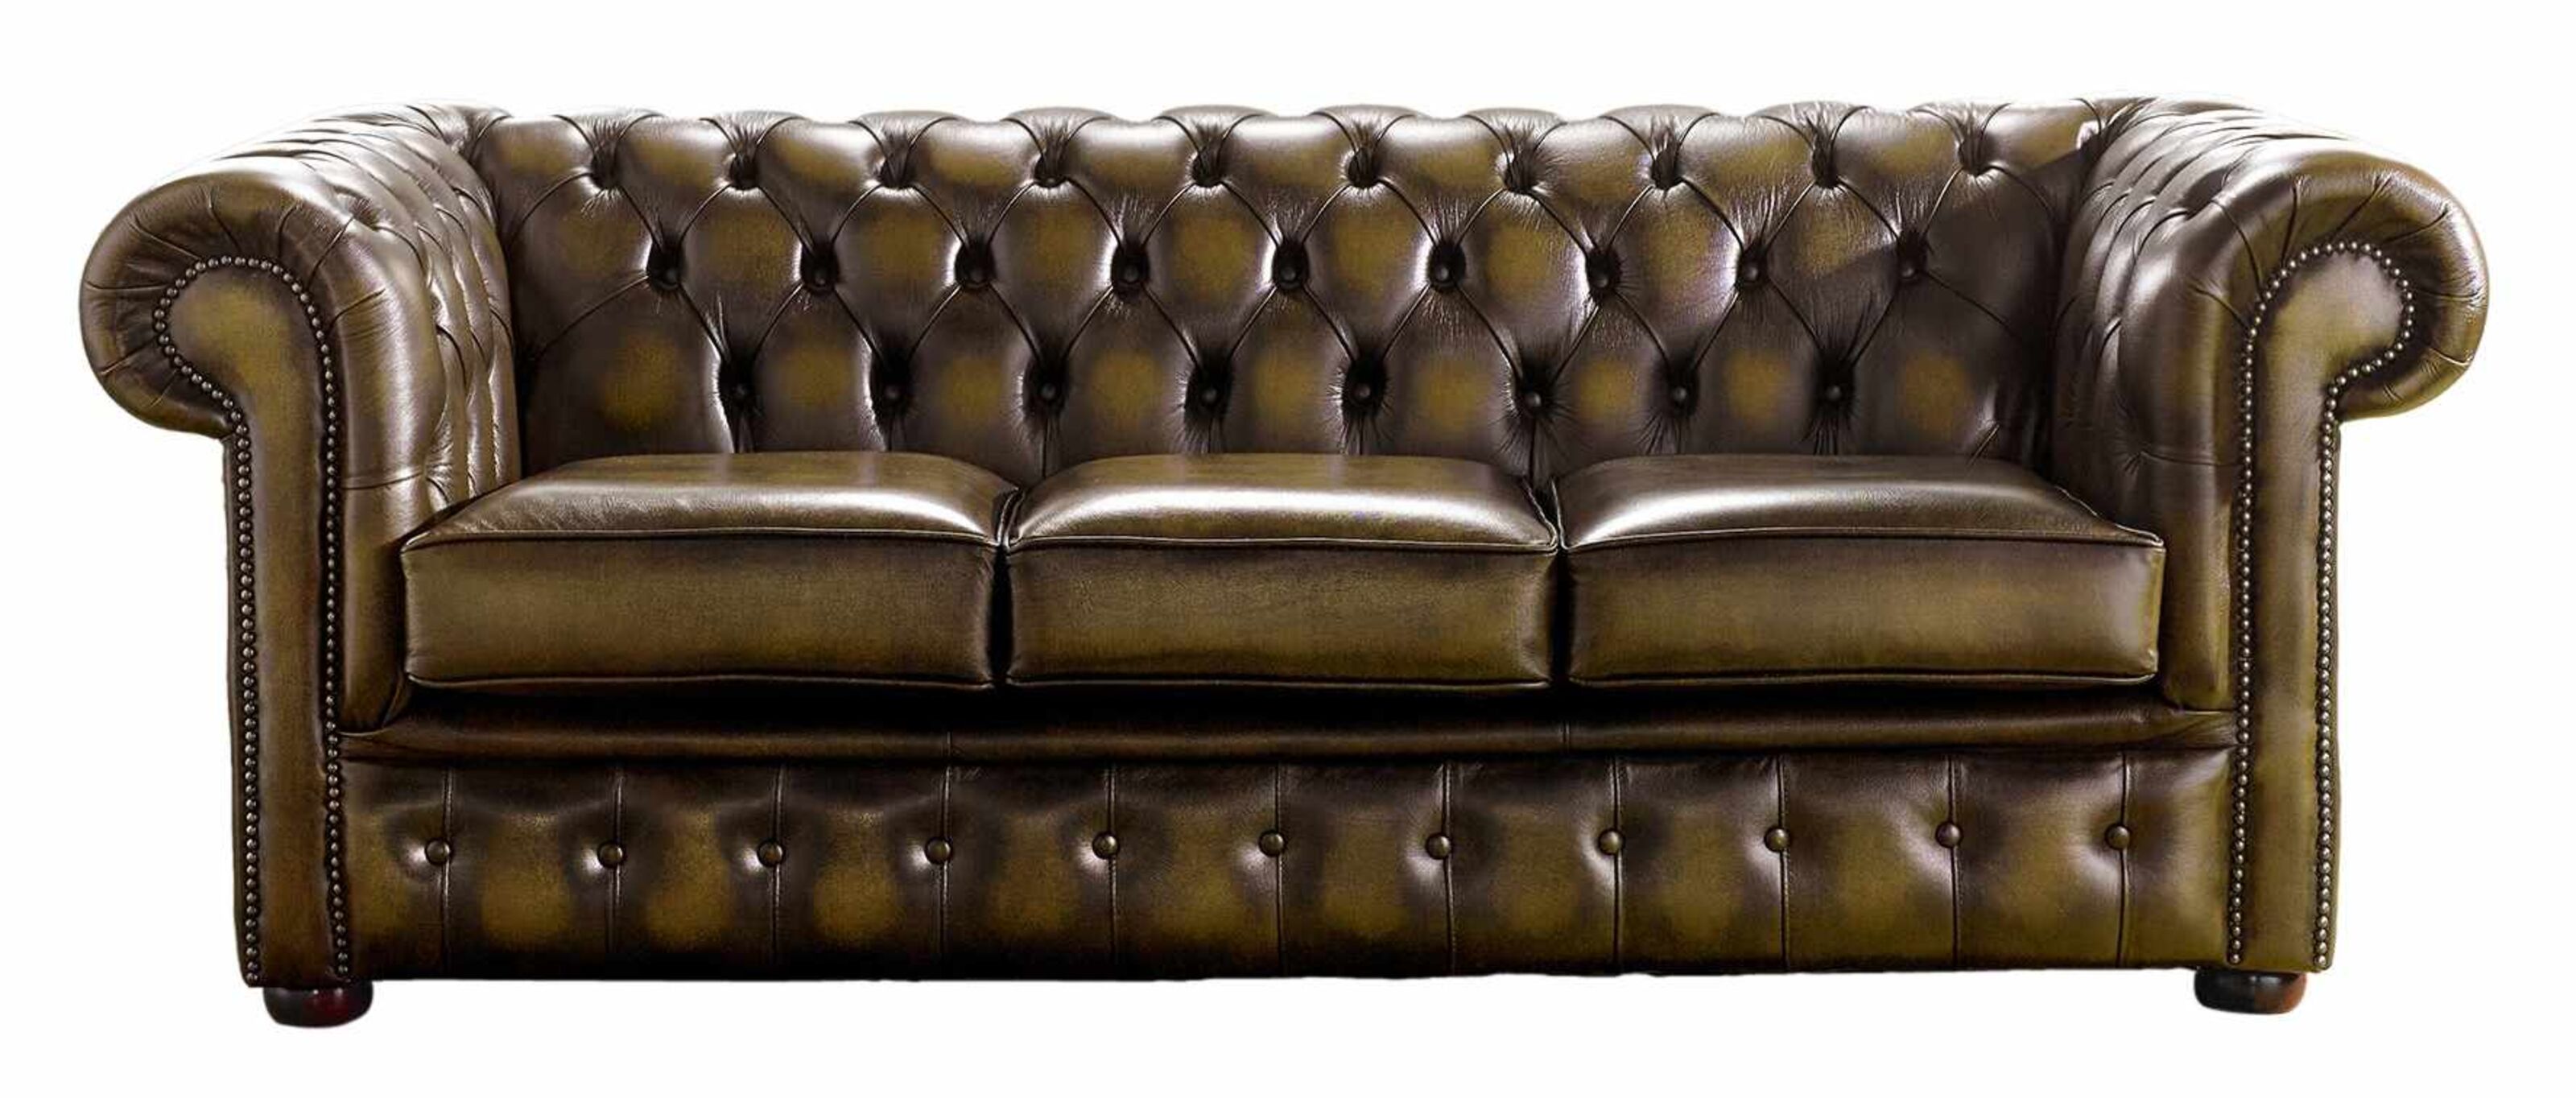 Crafting Timeless Comfort The Origin and Mastery of Chesterfield Sofa Production  %Post Title